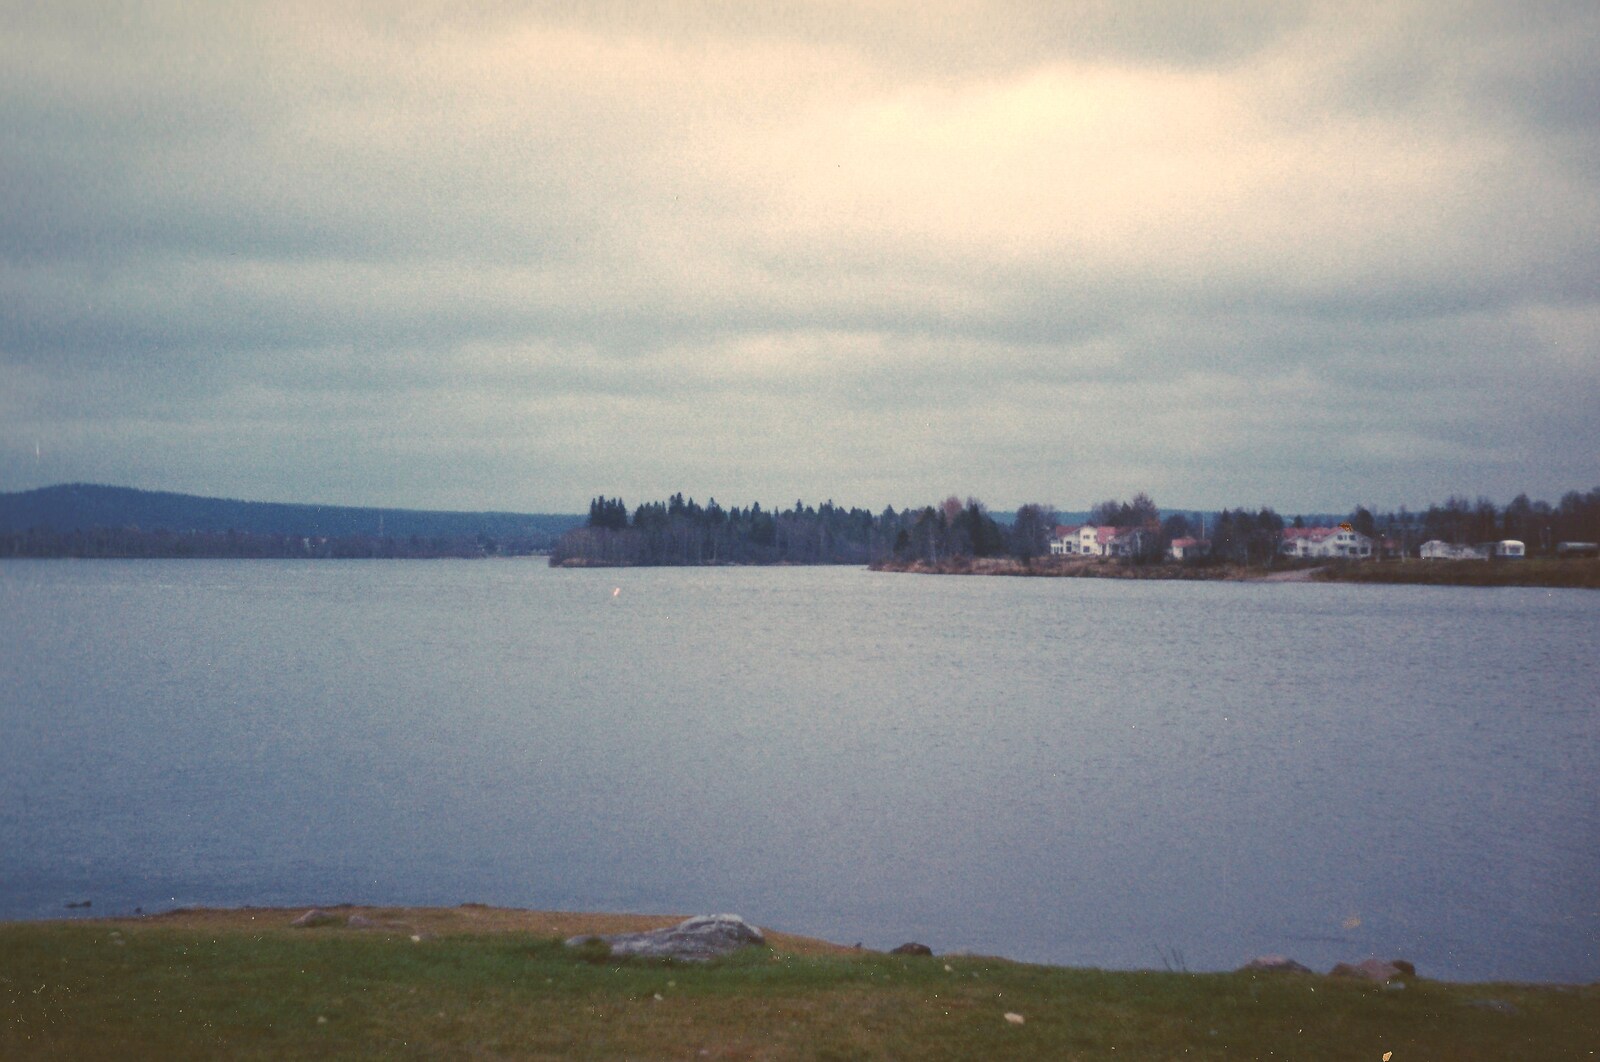 A Finnish lake from A Trip to Rovaniemi and the Arctic Circle, Lapland, Finland - 28th November 1999